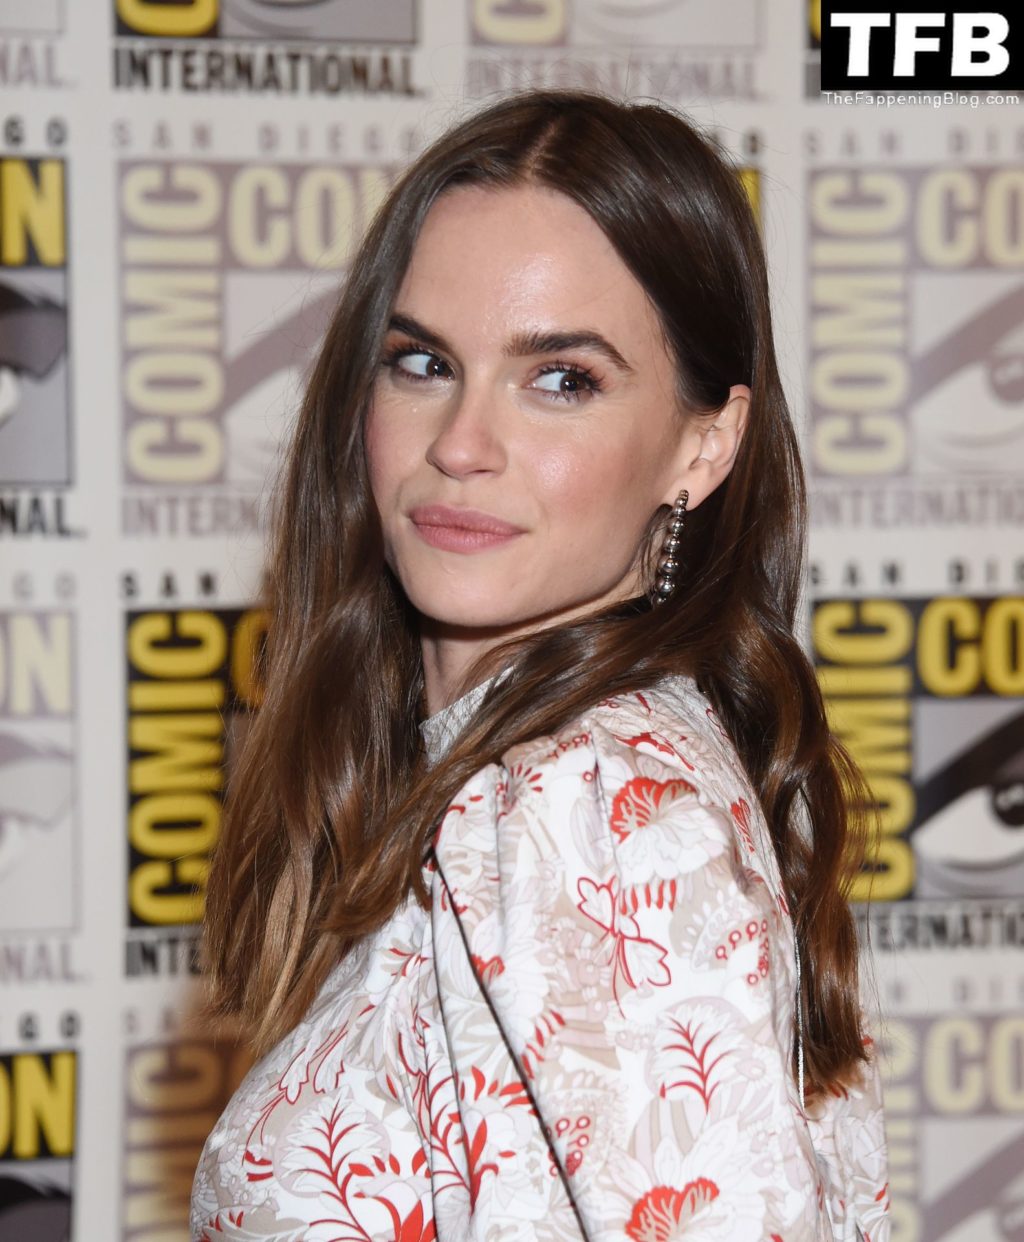 Ema Horvath Flaunts Her Sexy Legs During Comic-Con International in San Diego (20 Photos)